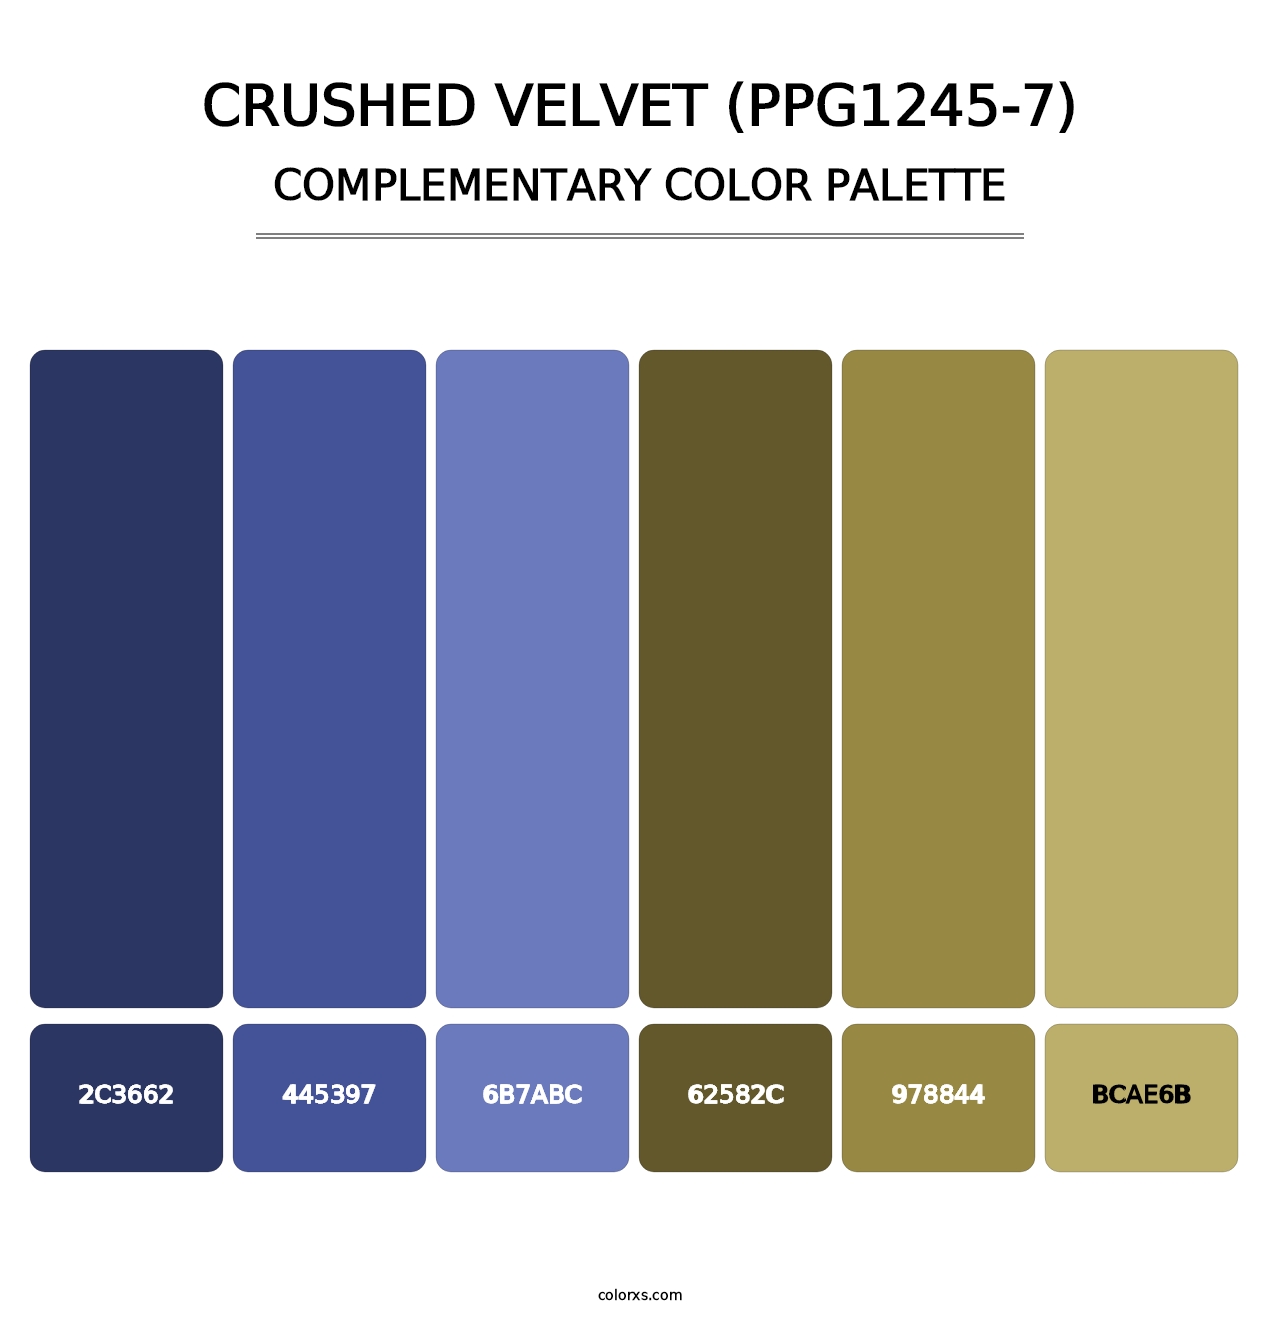 Crushed Velvet (PPG1245-7) - Complementary Color Palette